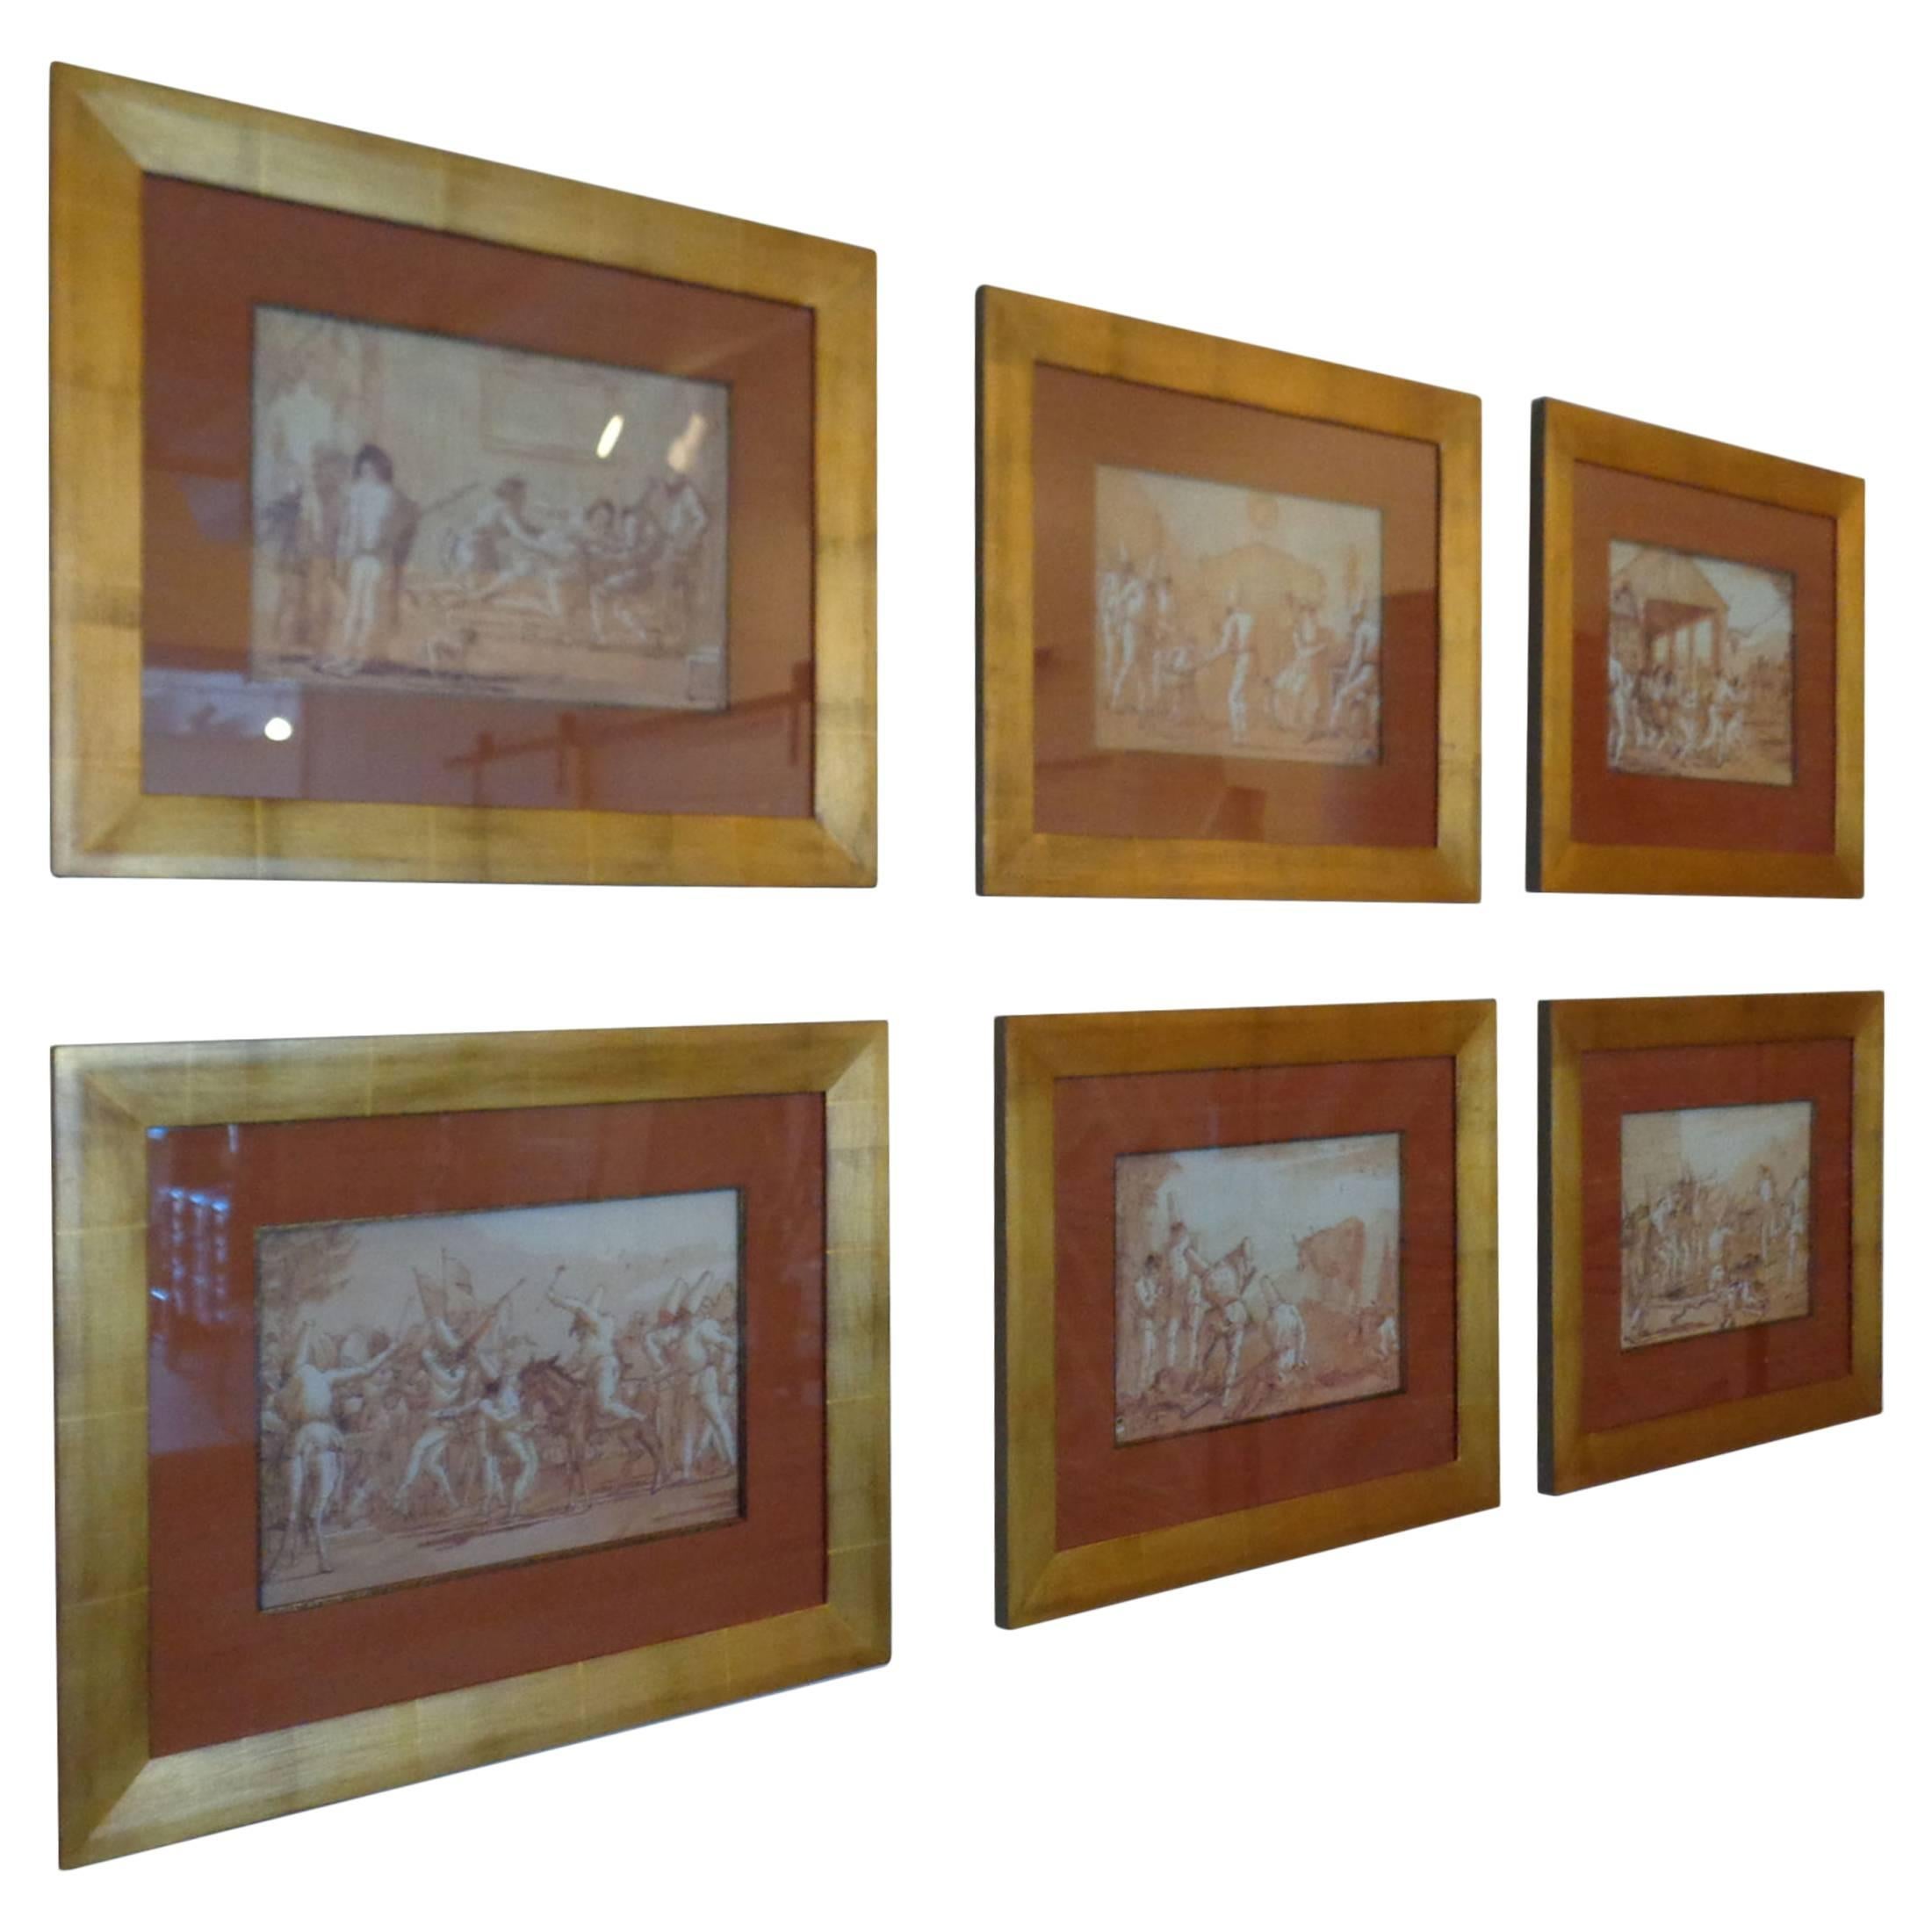 Punchinello Prints of Drawings by Domenico Tiepolo